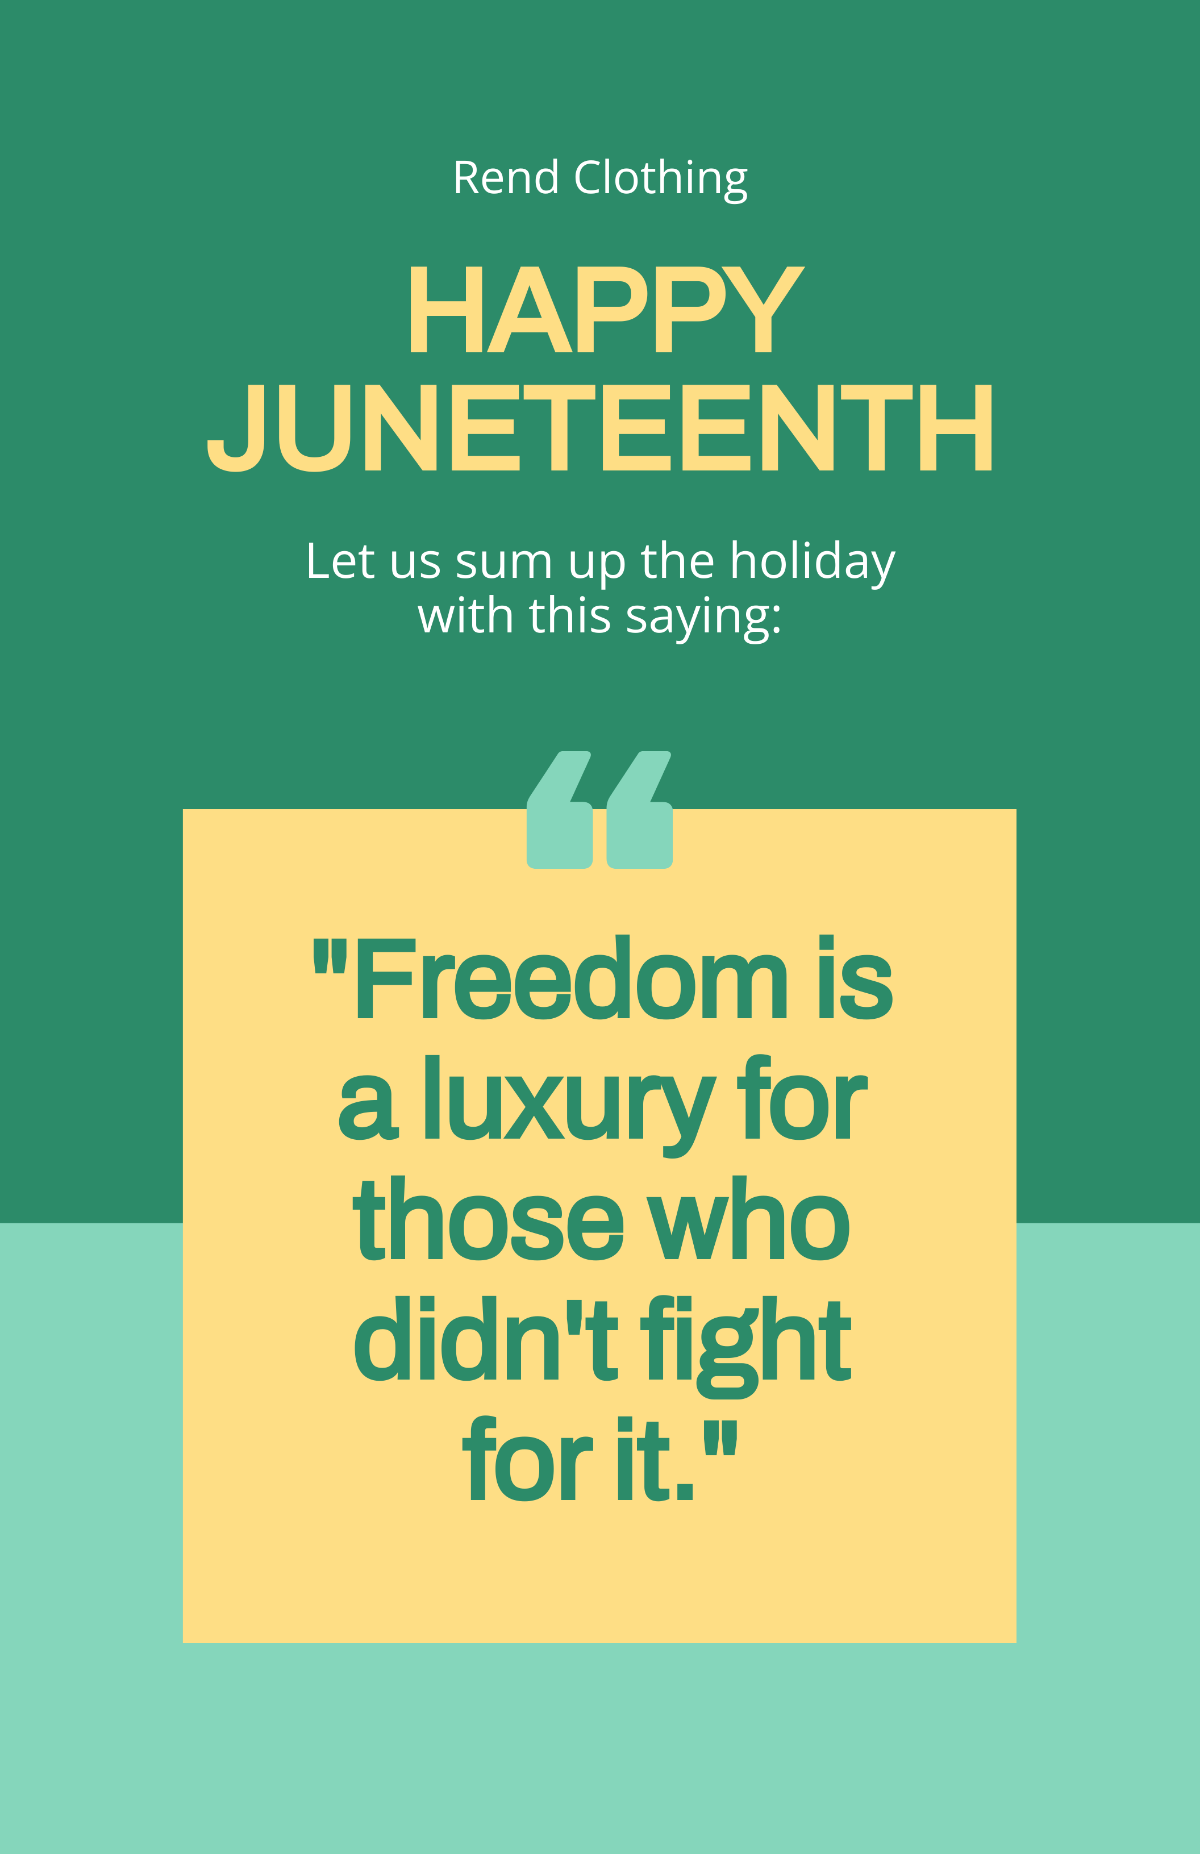 Free Juneteenth Saying Poster Template